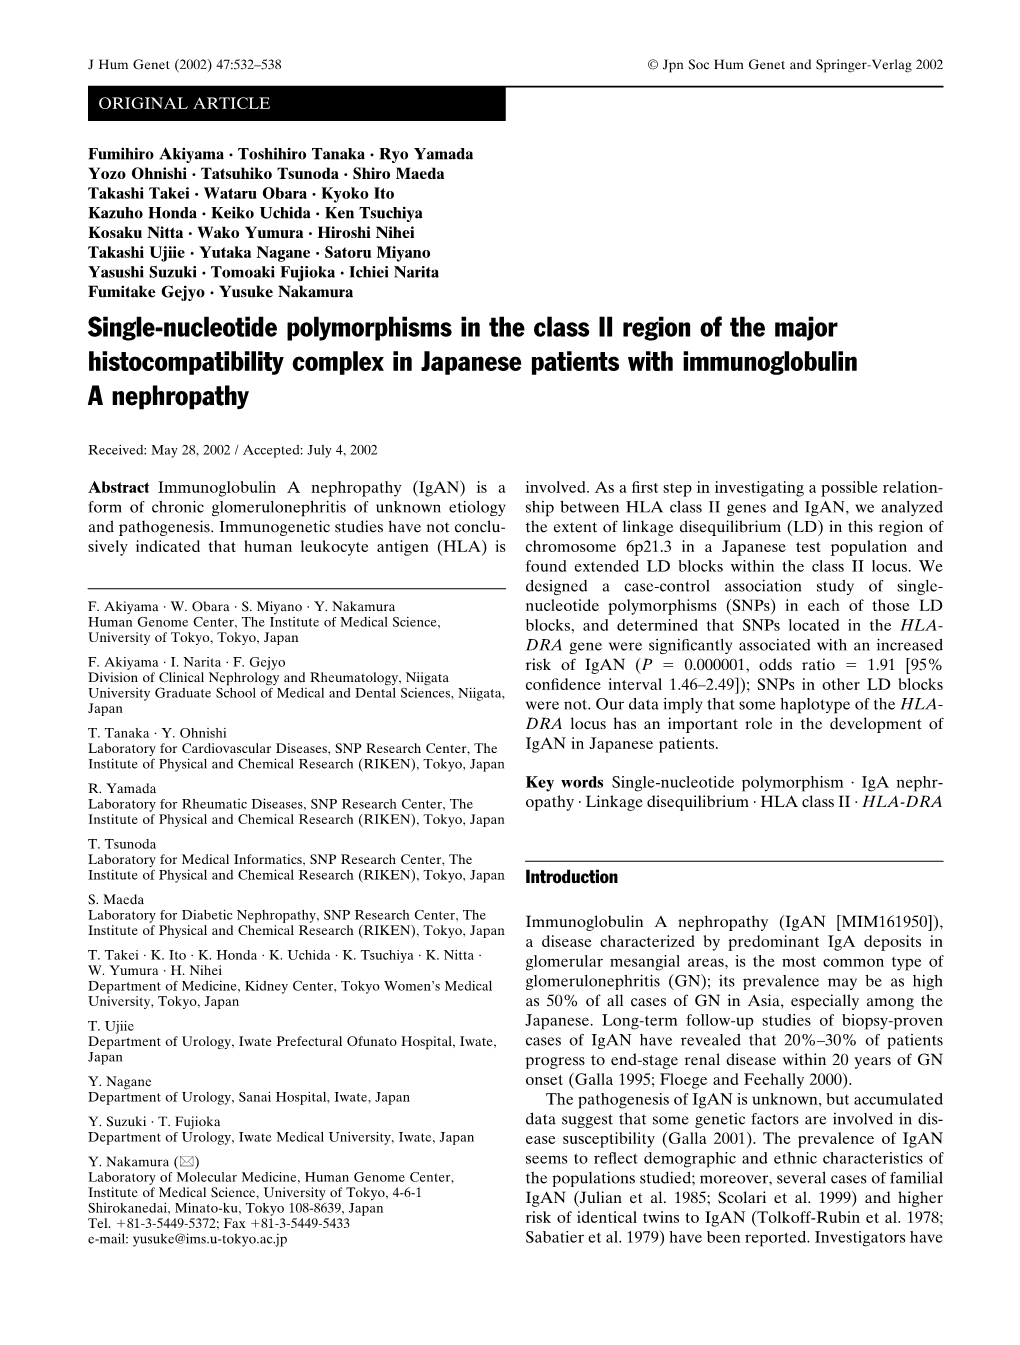 Single-Nucleotide Polymorphisms in the Class II Region of the Major Histocompatibility Complex in Japanese Patients with Immunoglobulin a Nephropathy